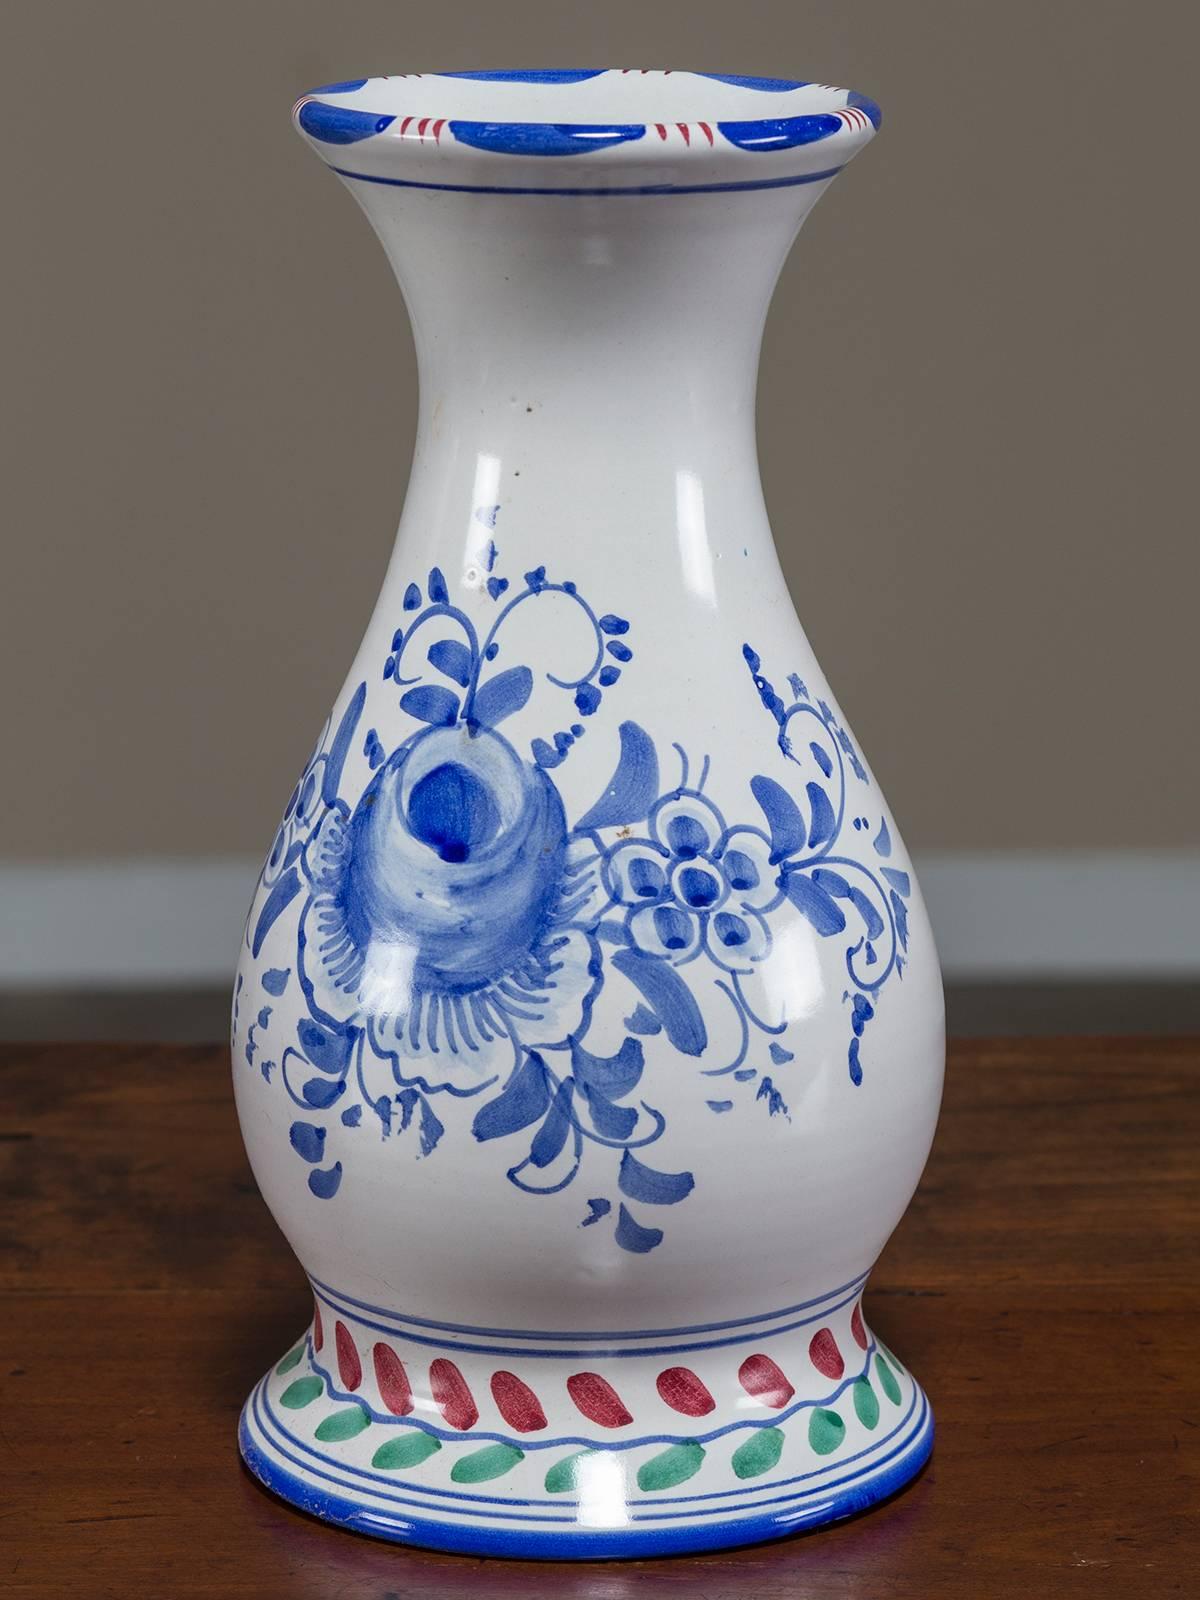 Glazed Set of Three Blue and White Hand-Painted Italian Vases by Solimene, Vietri